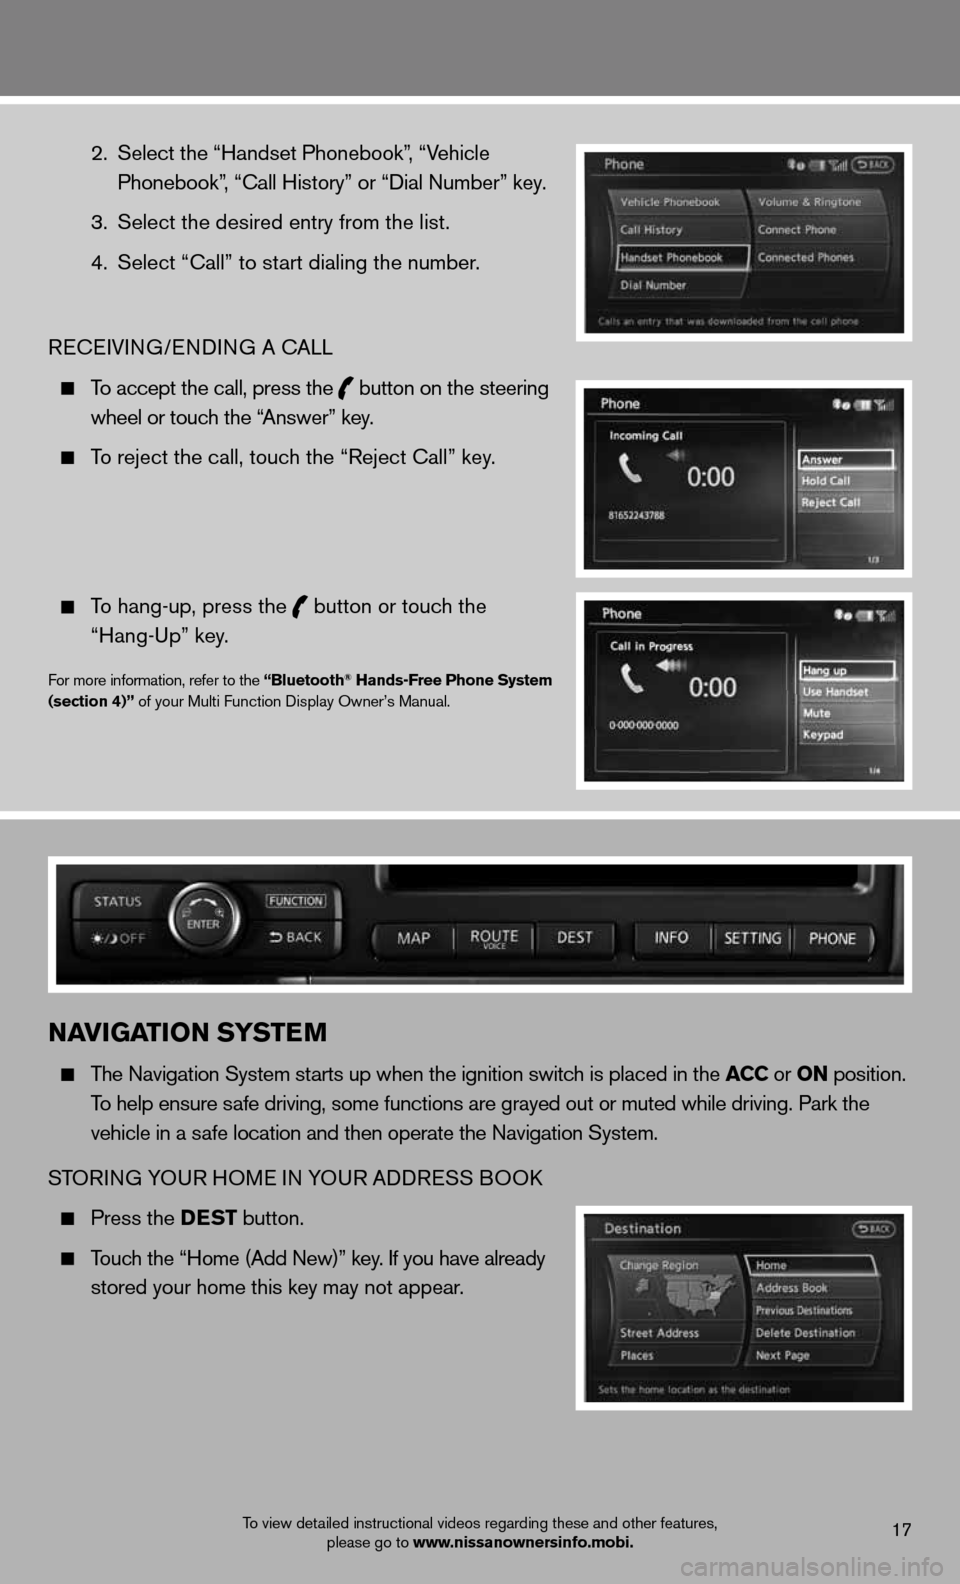 NISSAN GT-R 2013 R35 Quick Reference Guide    2. Select the “Handset Phonebook”, “Vehicle   
      Phonebook”, “Call History” or “Dial Number” key.  
    3. Select the desired entry from the list.  
    4. Select “Call” to 